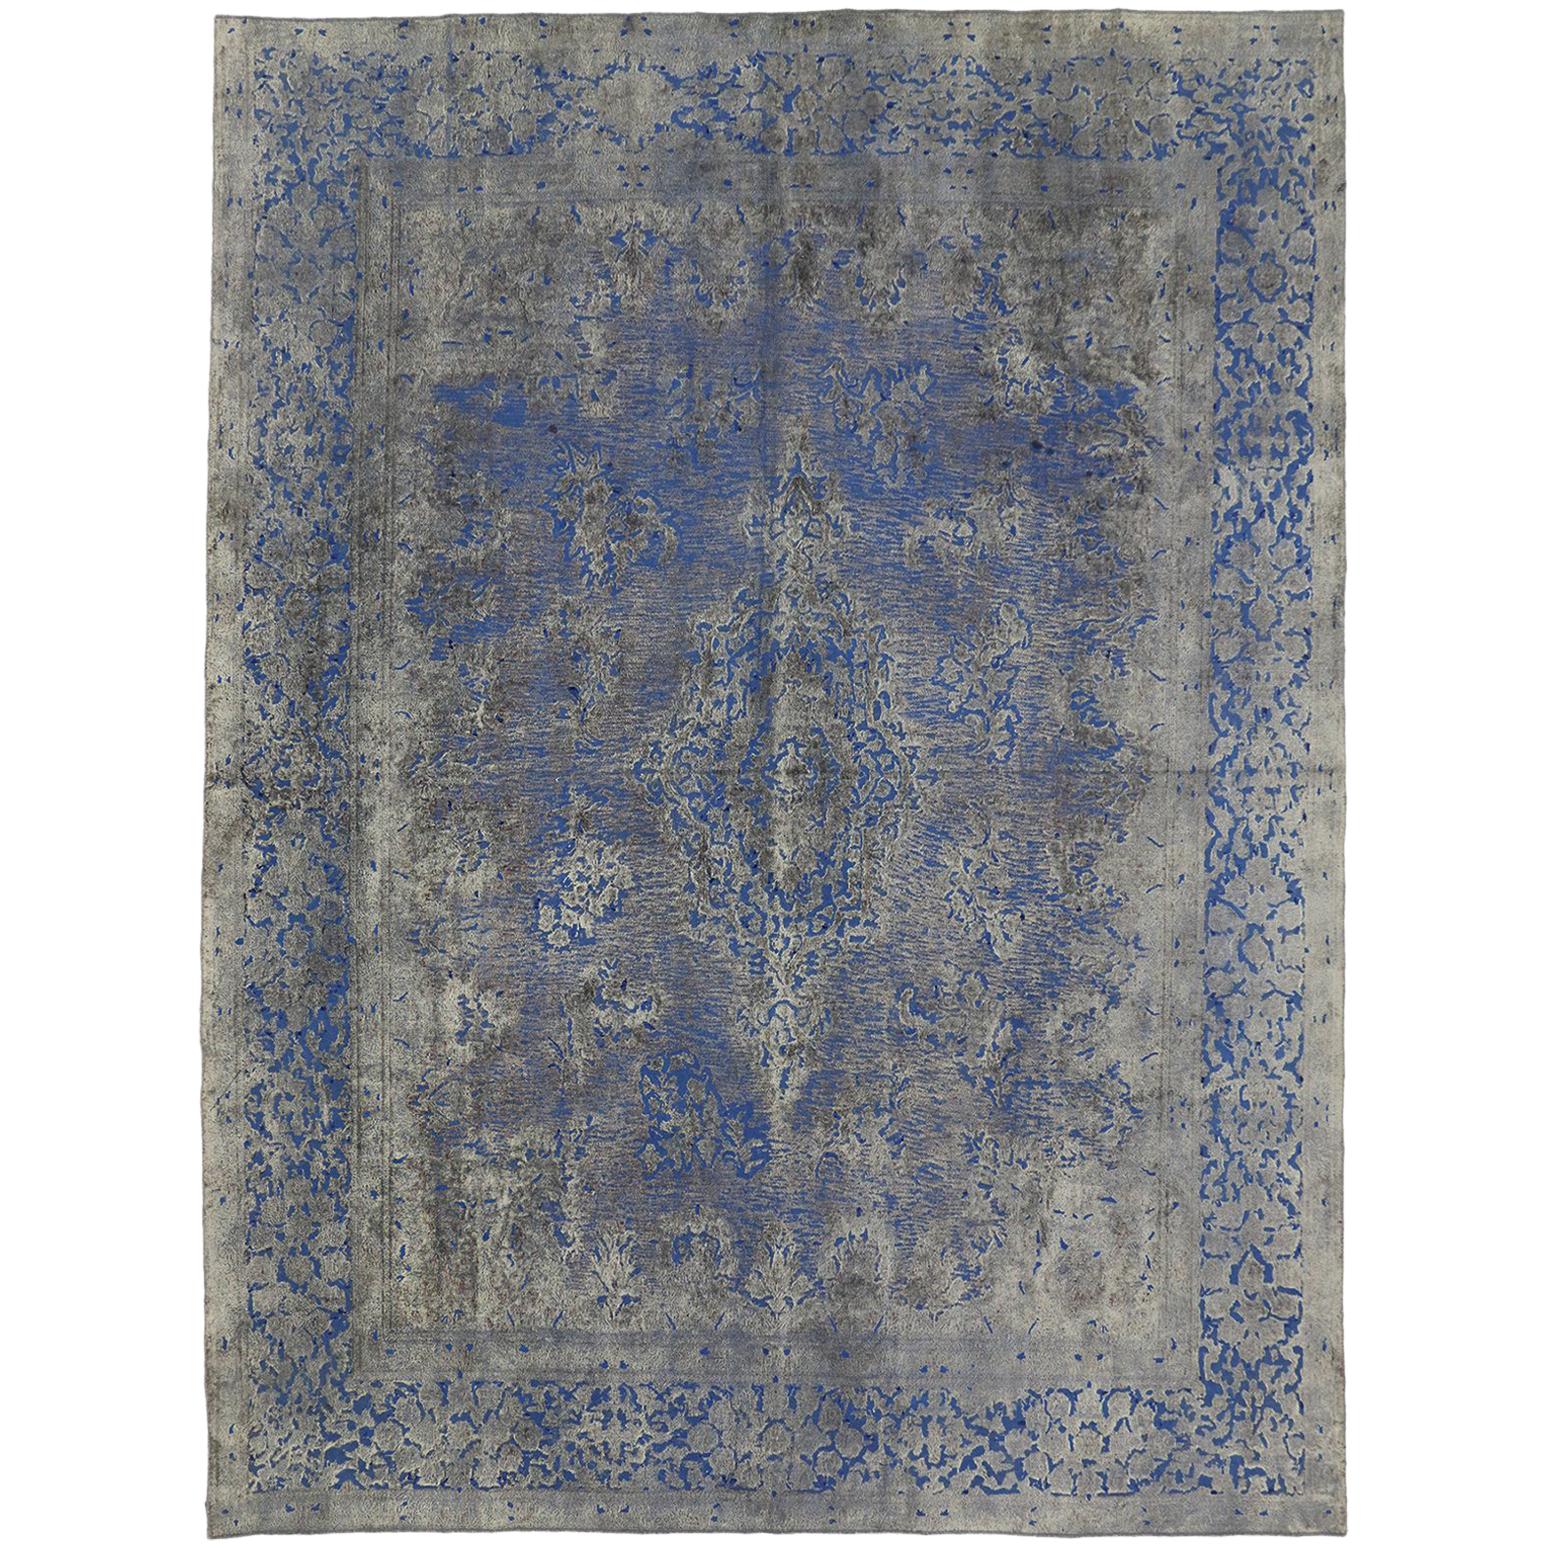 Modern Style Overdyed Distressed Vintage Turkish Rug with Industrial Design